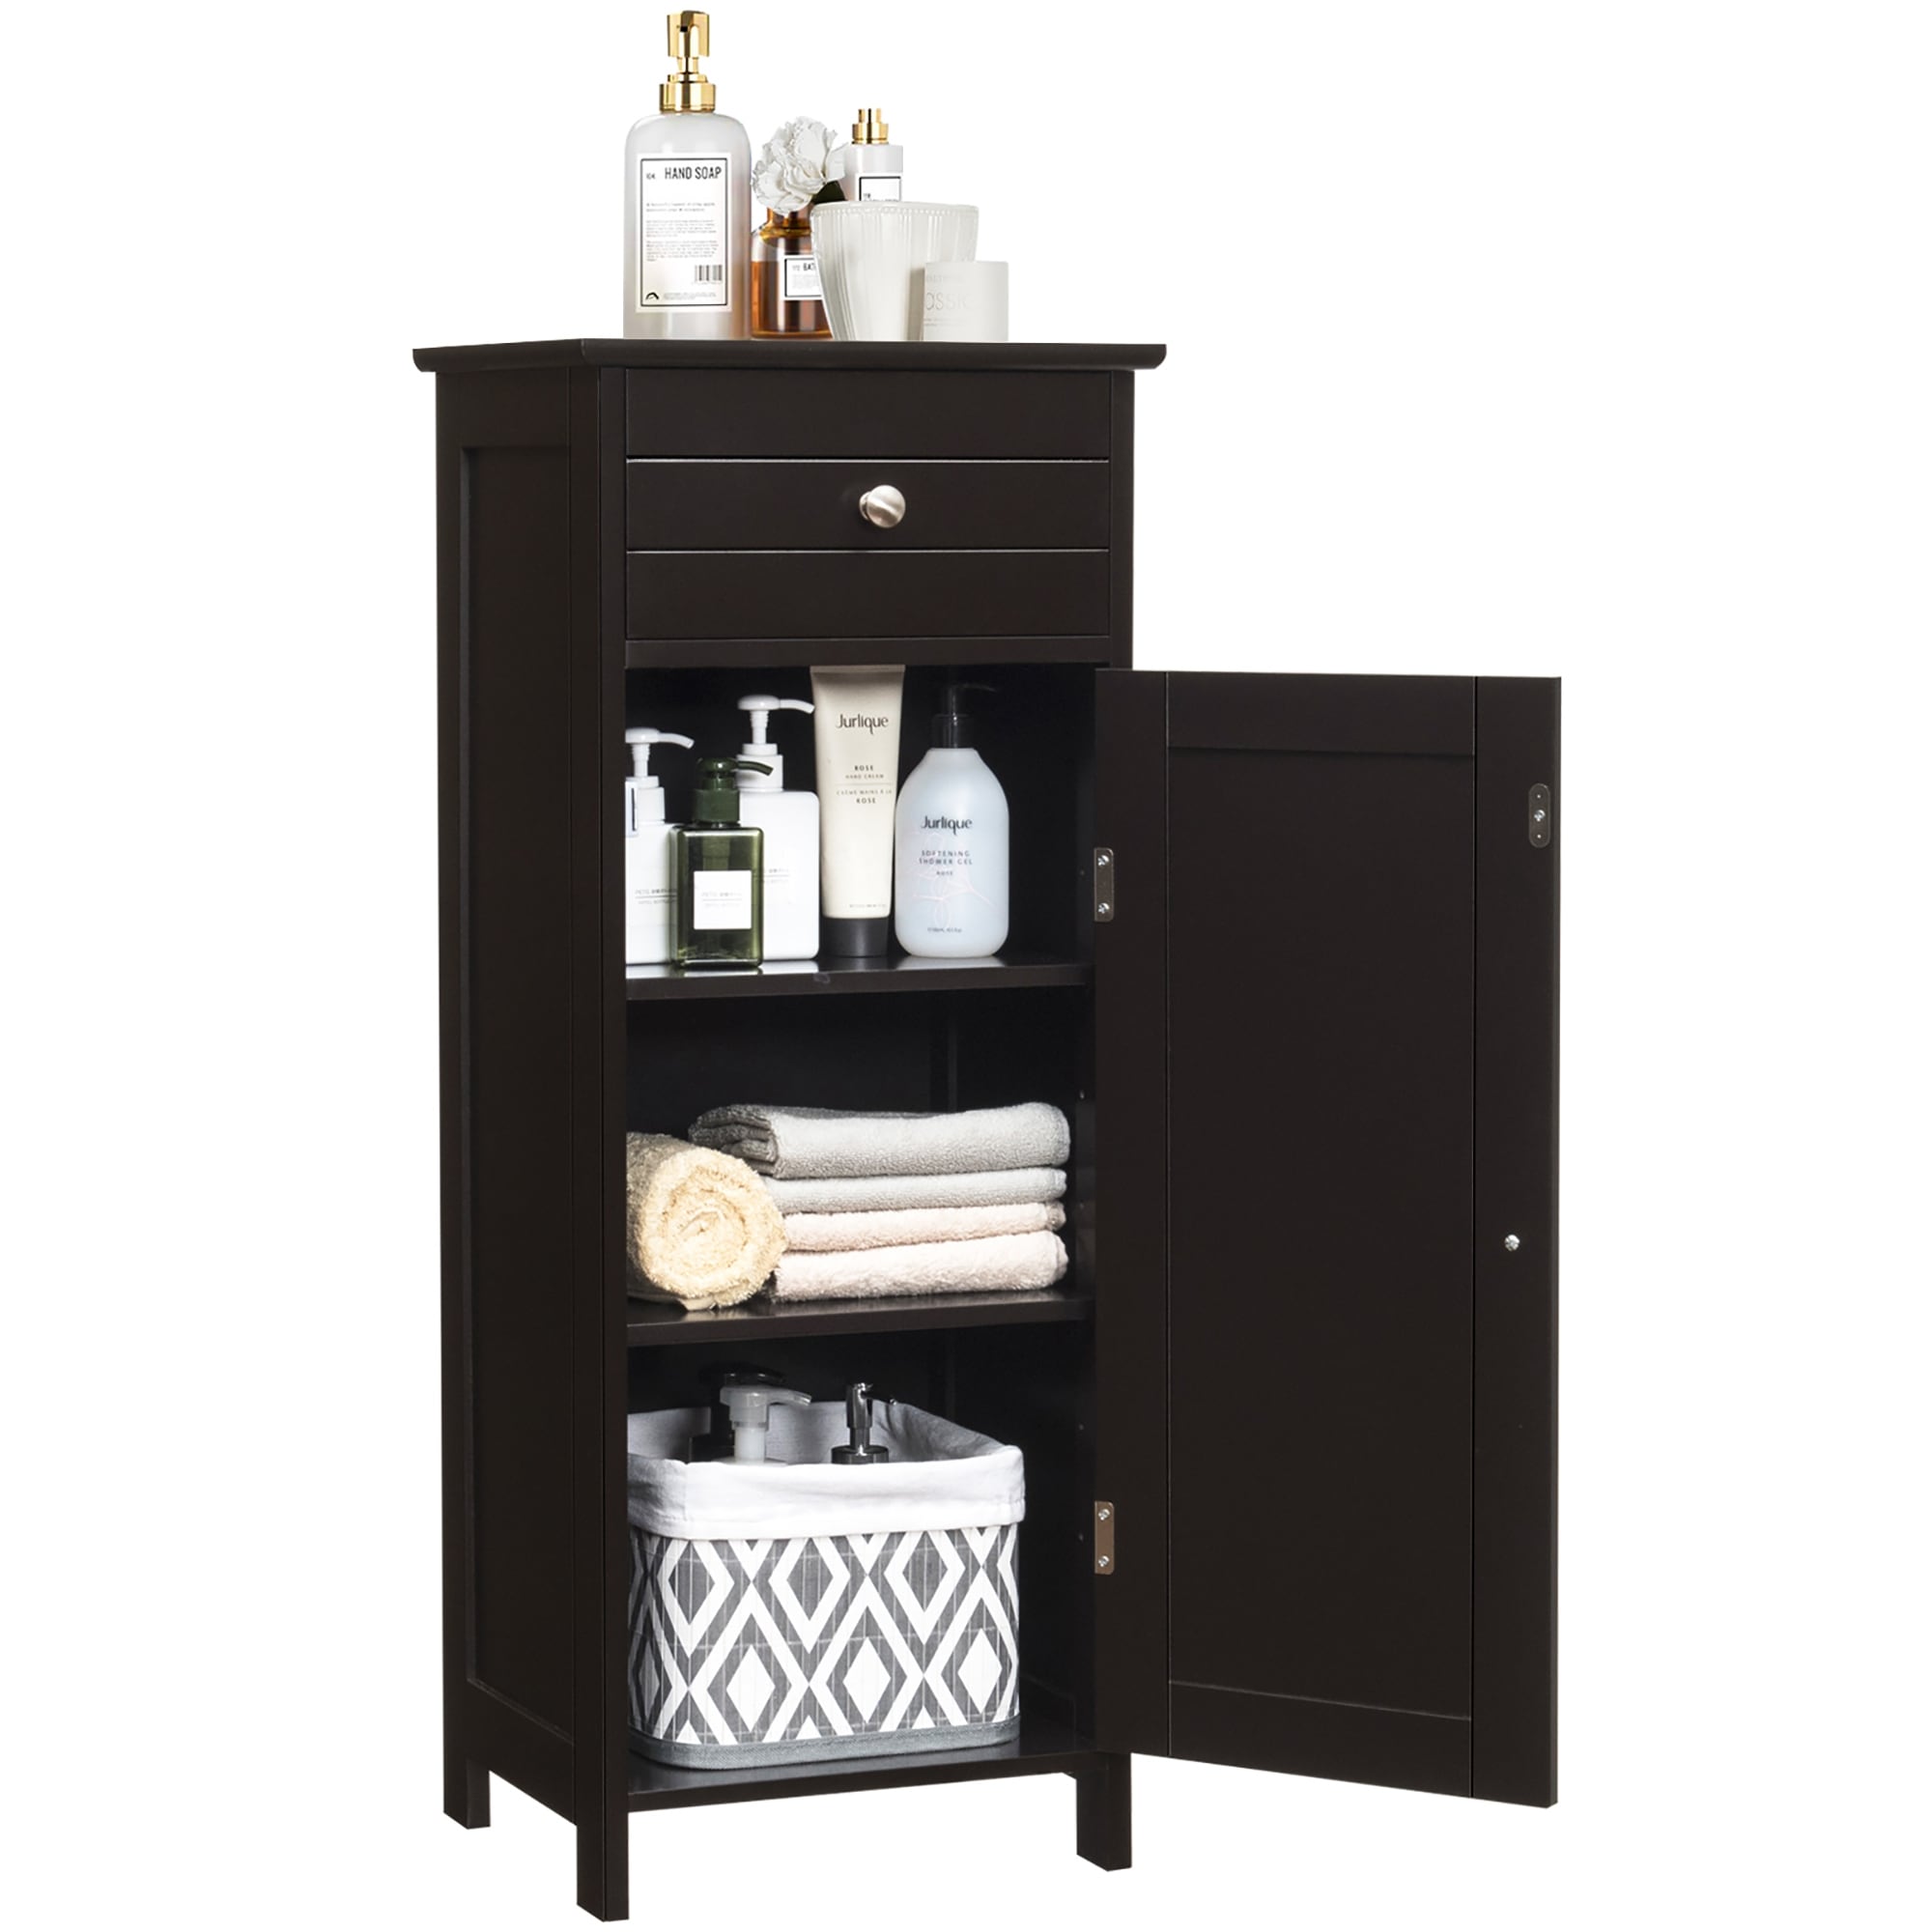 https://ak1.ostkcdn.com/images/products/is/images/direct/539f8a4fe43720540406f04d671d4ef2a77300df/Costway-Bathroom-Floor-Cabinet-Storage-Organizer-Free-Standing-w-.jpg